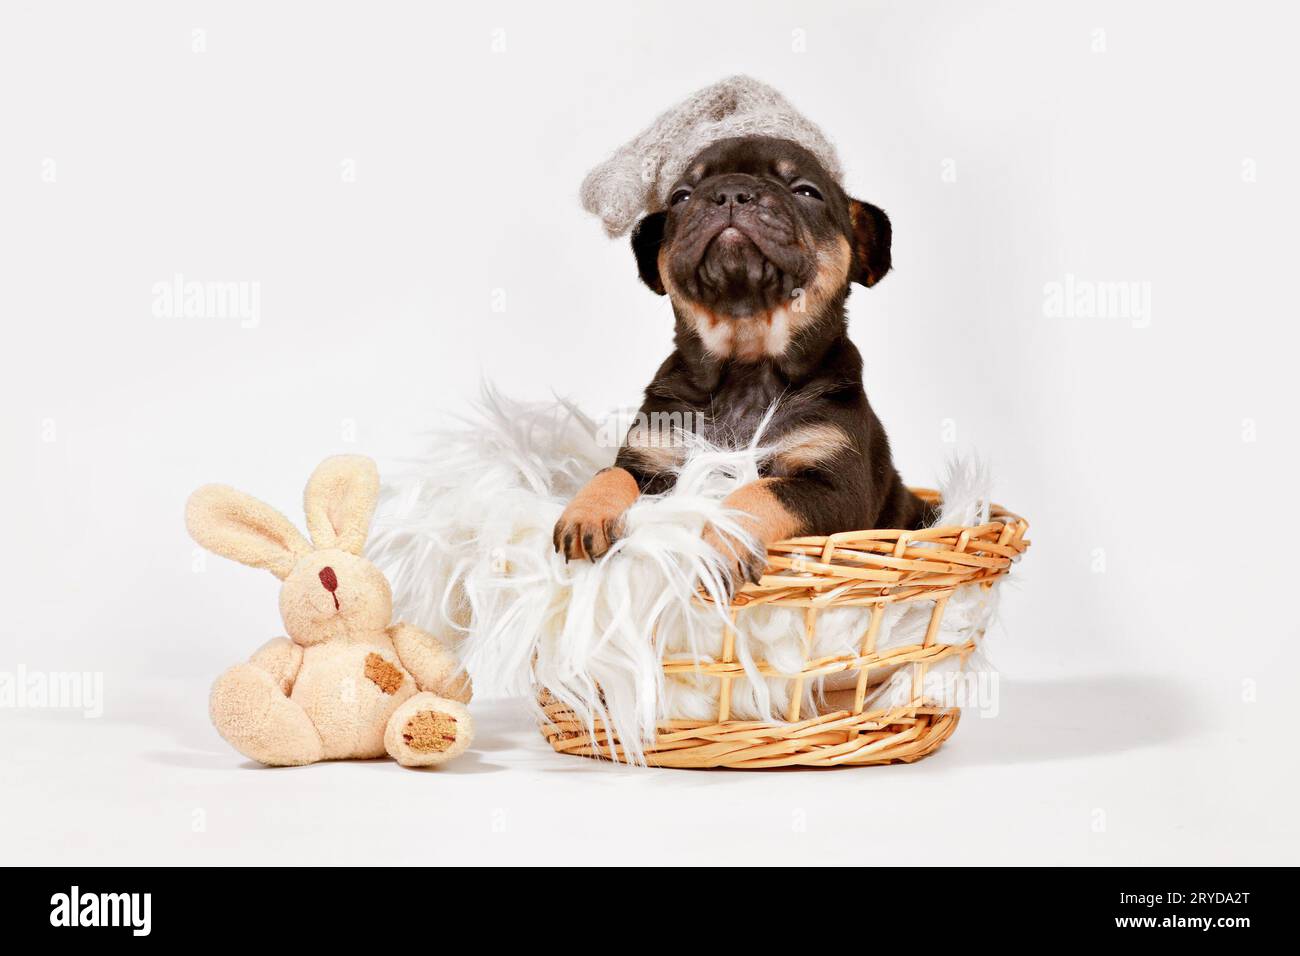 Cute tan French Bulldog dog puppy with night cap and toy plush bunny in basket Stock Photo